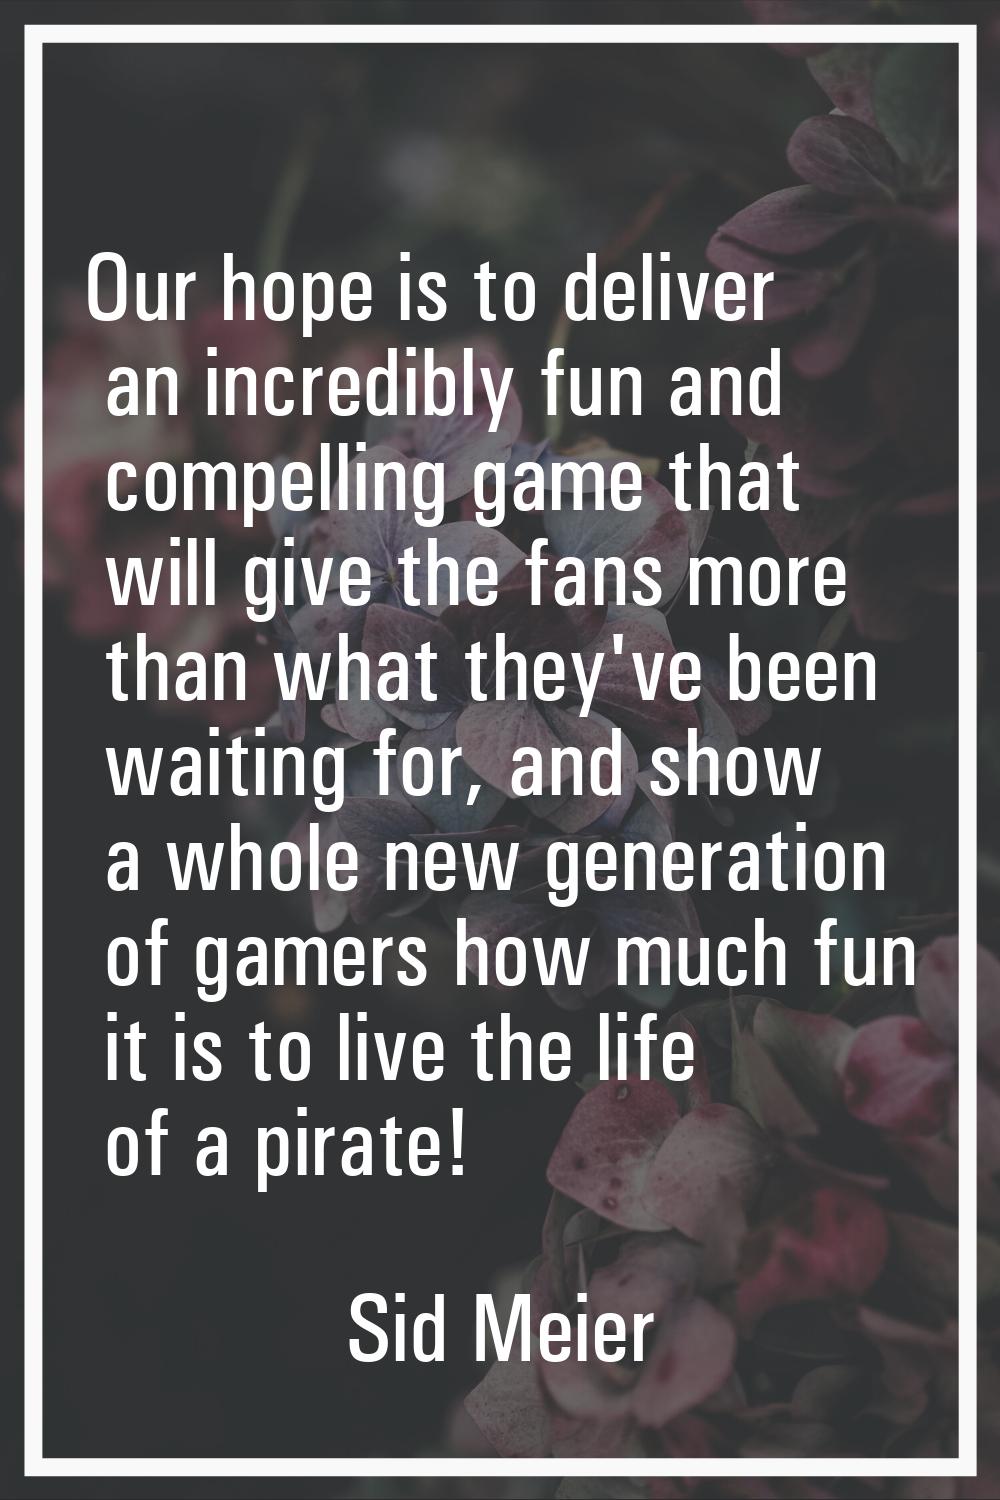 Our hope is to deliver an incredibly fun and compelling game that will give the fans more than what